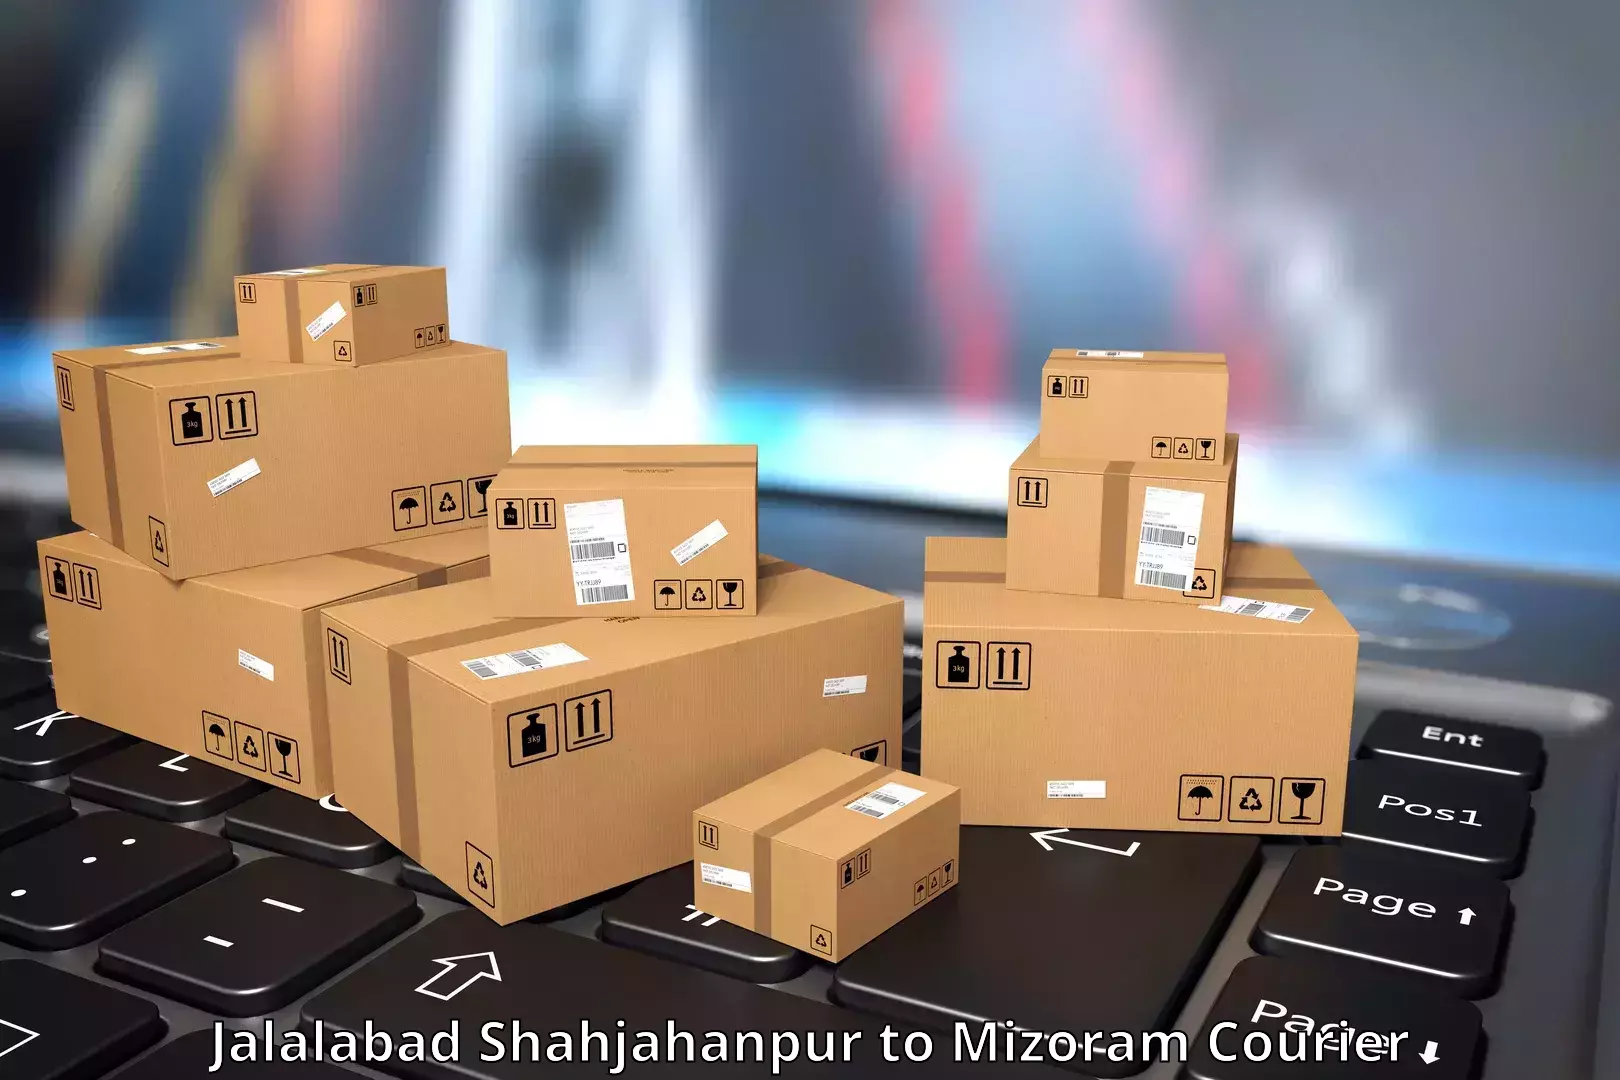 Automated parcel services Jalalabad Shahjahanpur to Hnahthial